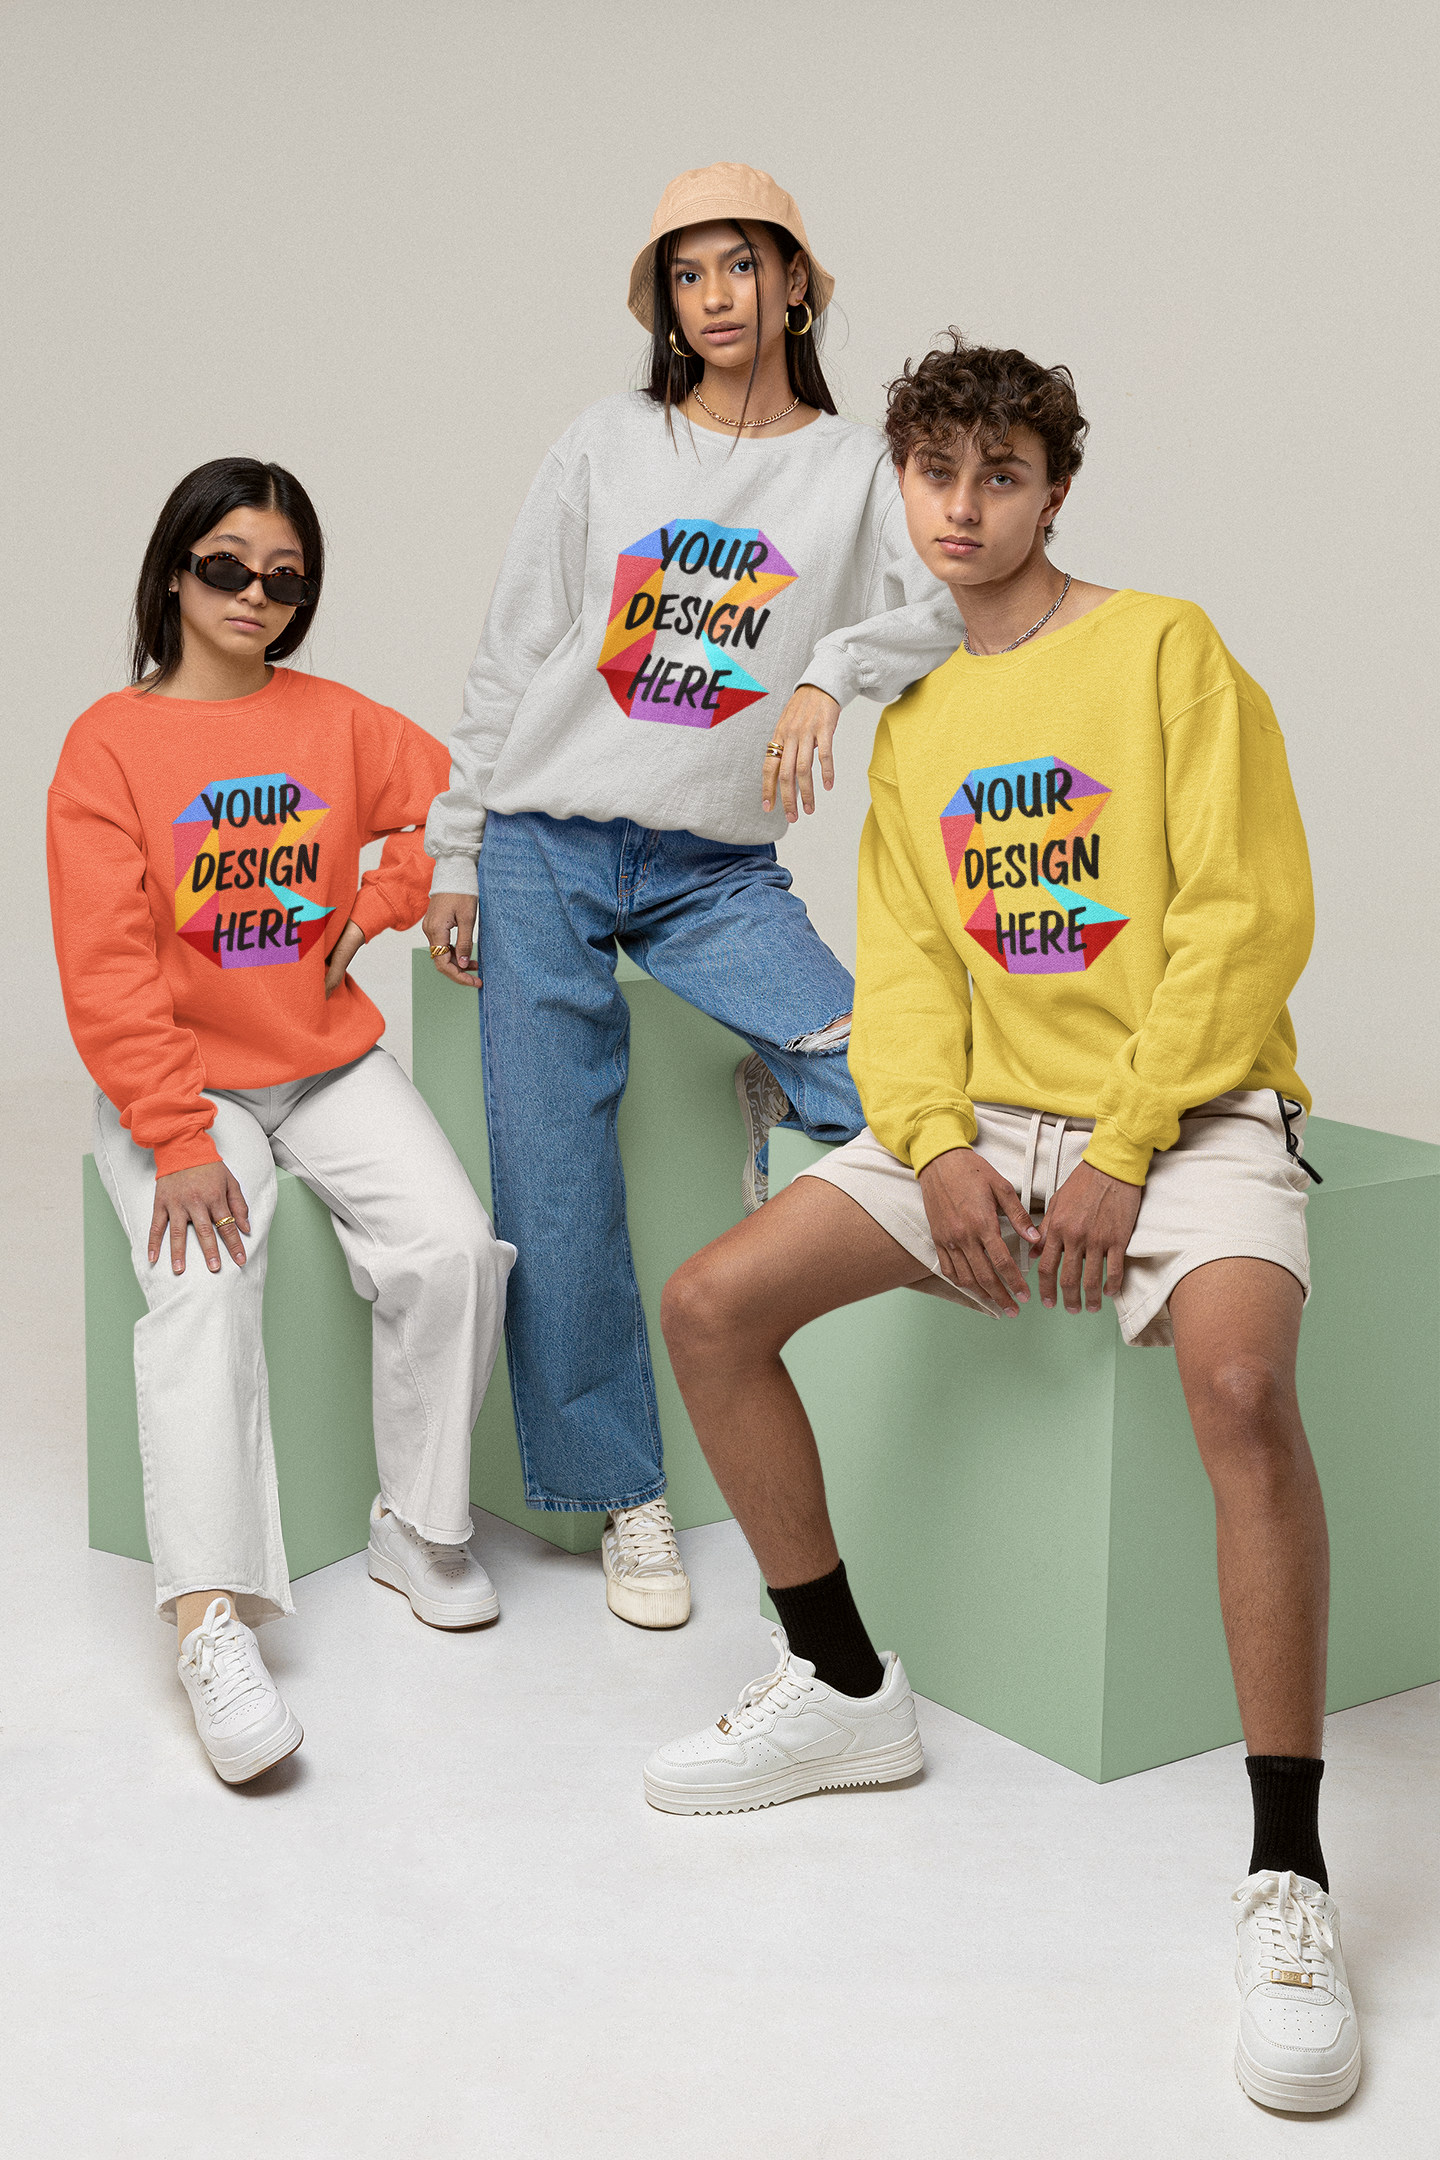 mockup-featuring-two-women-and-a-man-wearing-sweatshirts-m26195